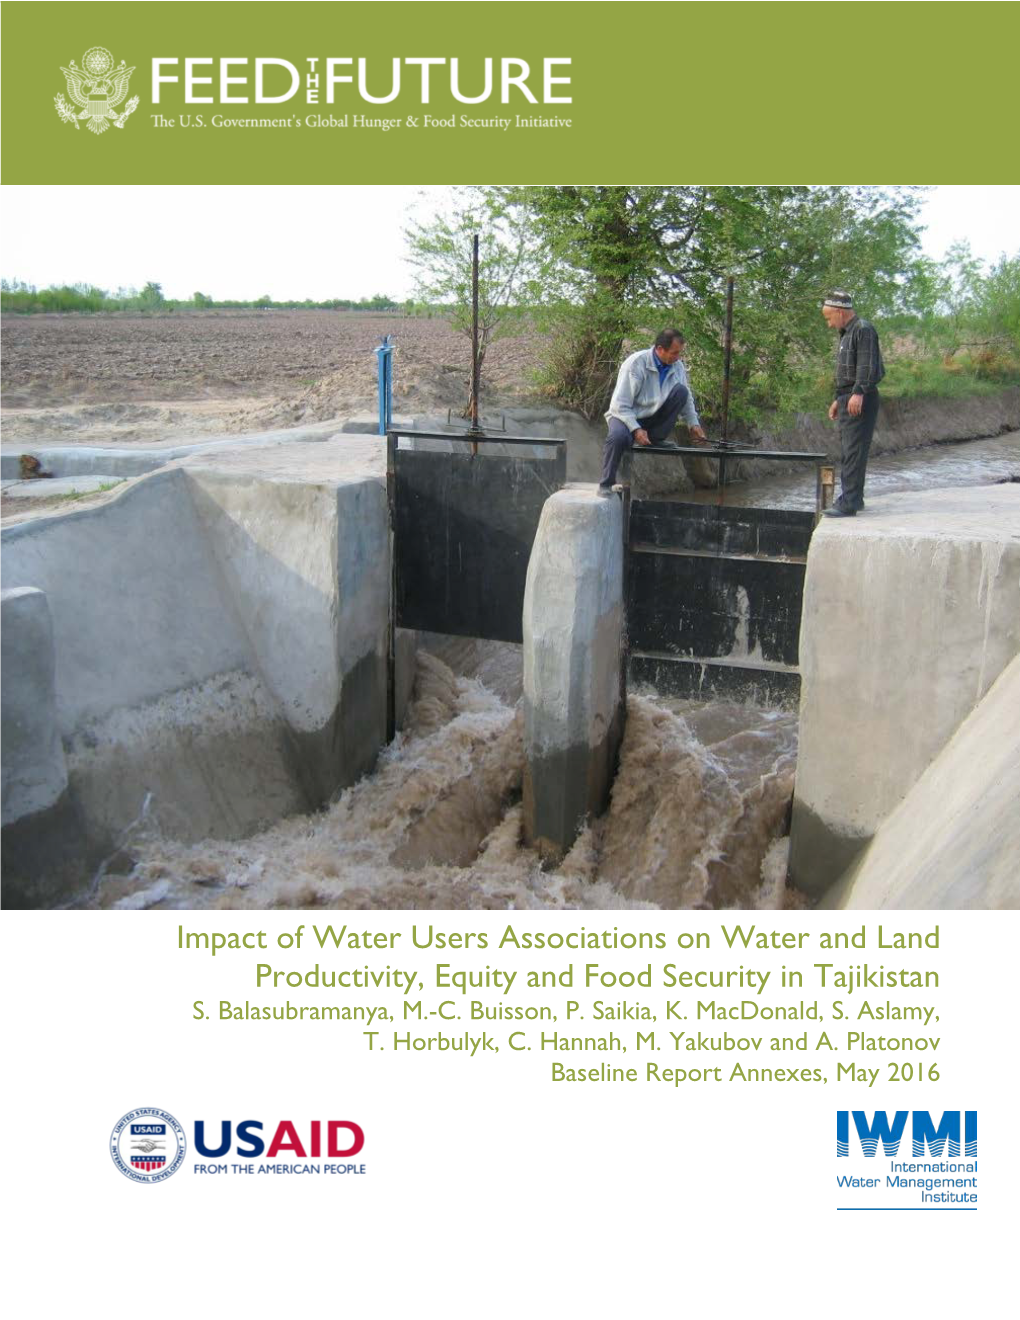 Impact of Water Users Associations on Water and Land Productivity, Equity and Food Security in Tajikistan